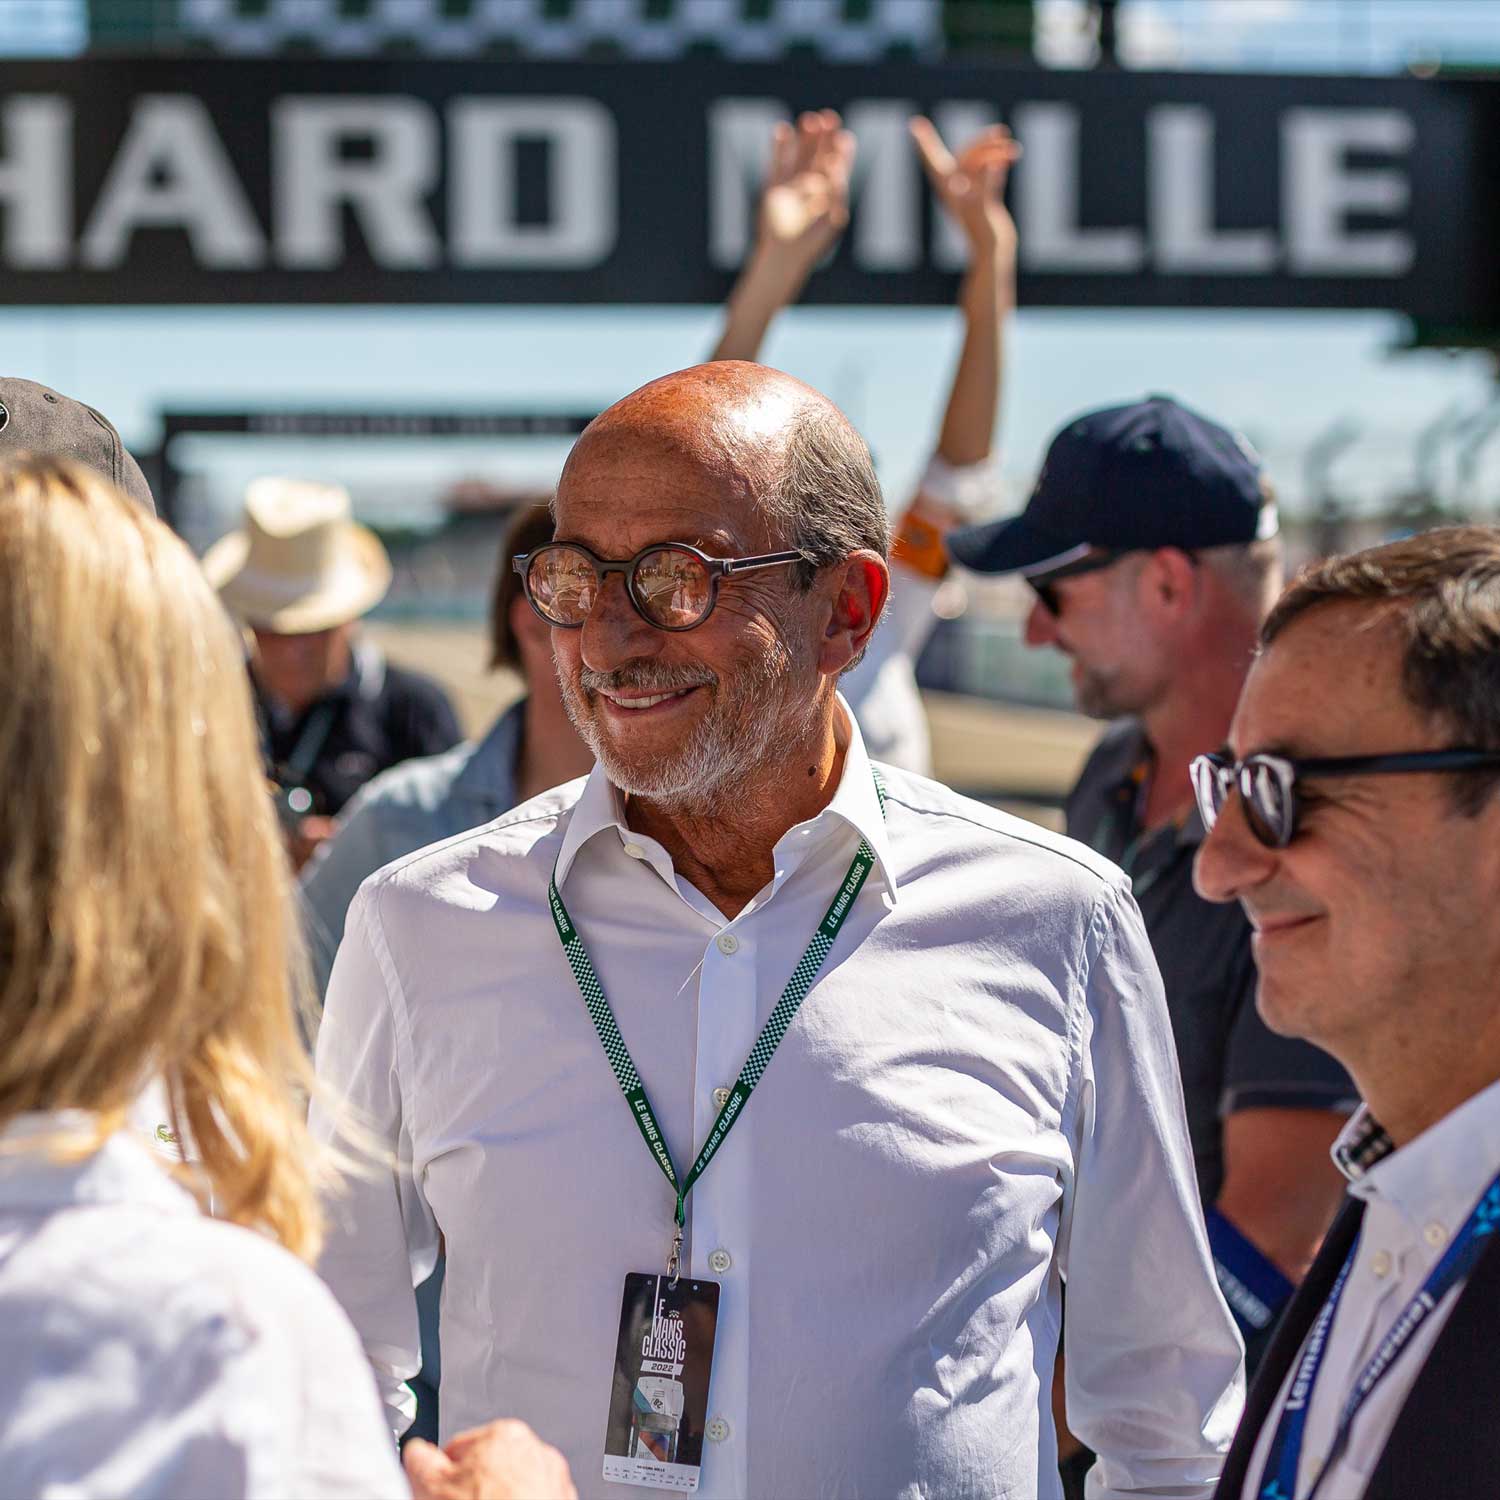 Richard Mille at the 2022 Le Mans Classic (Image: Peter Auto)